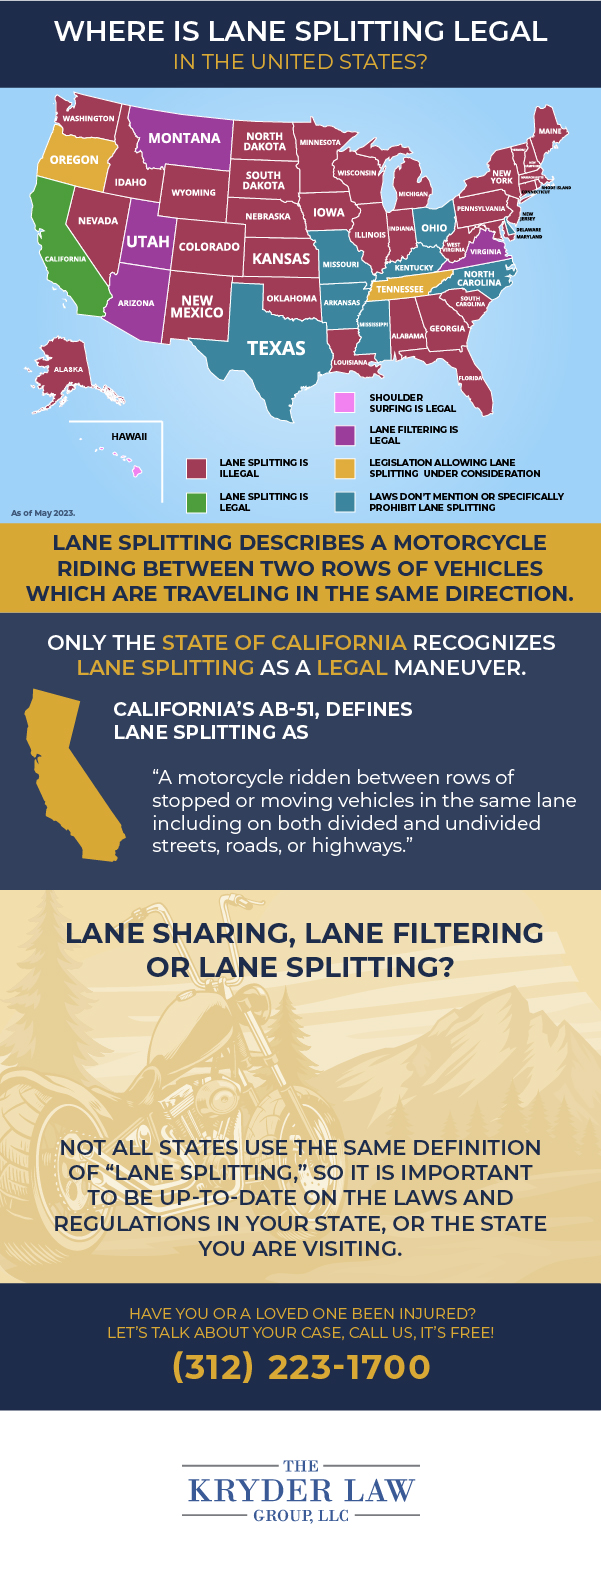 Where Is Lane Splitting Legal In The United States?